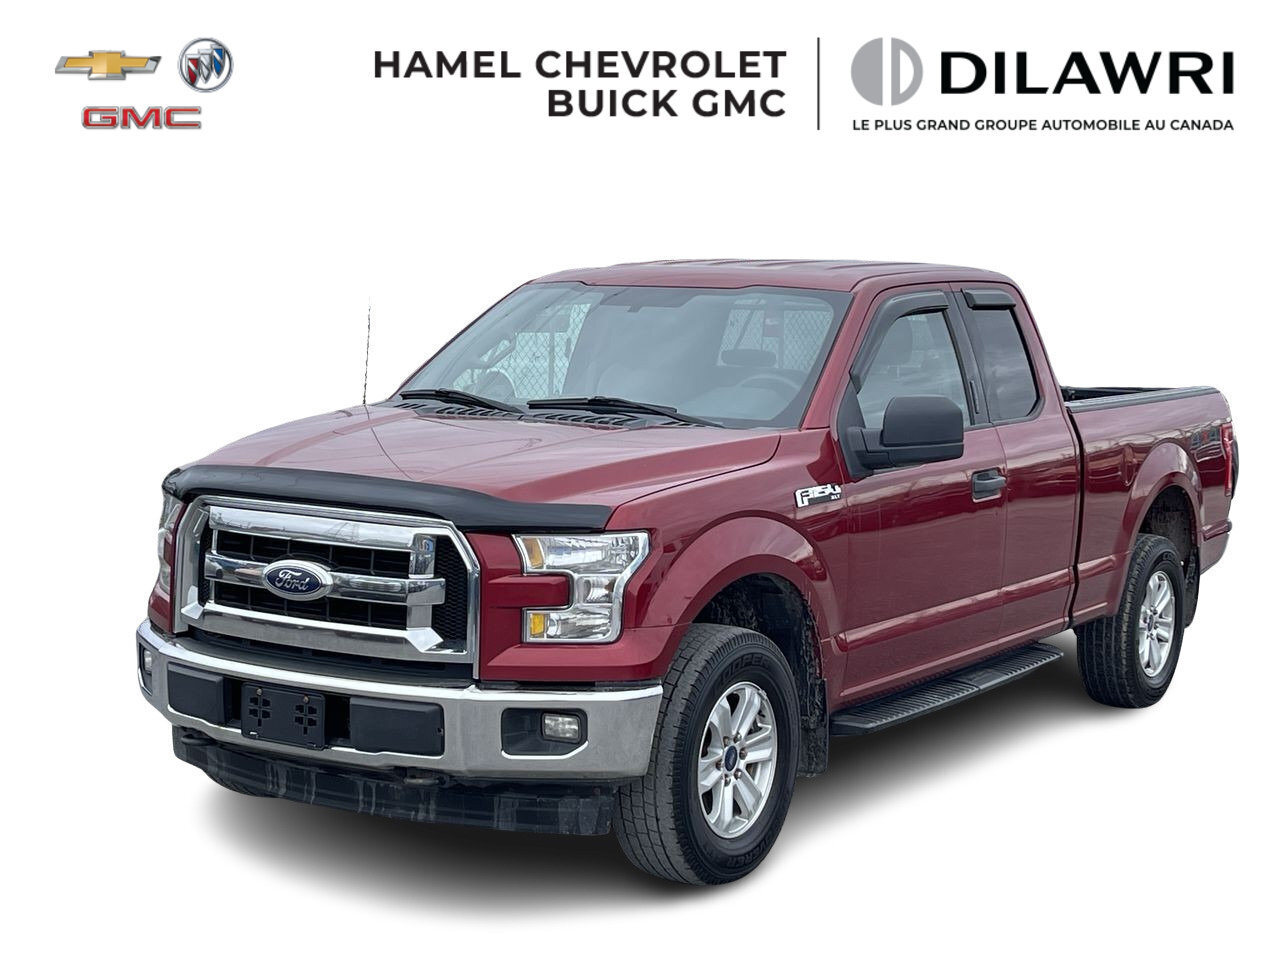 2017 Ford F-150 XLT SUPER CAB AWD 4X4 + 5.0L V8 + MARCHES-PIEDS ++